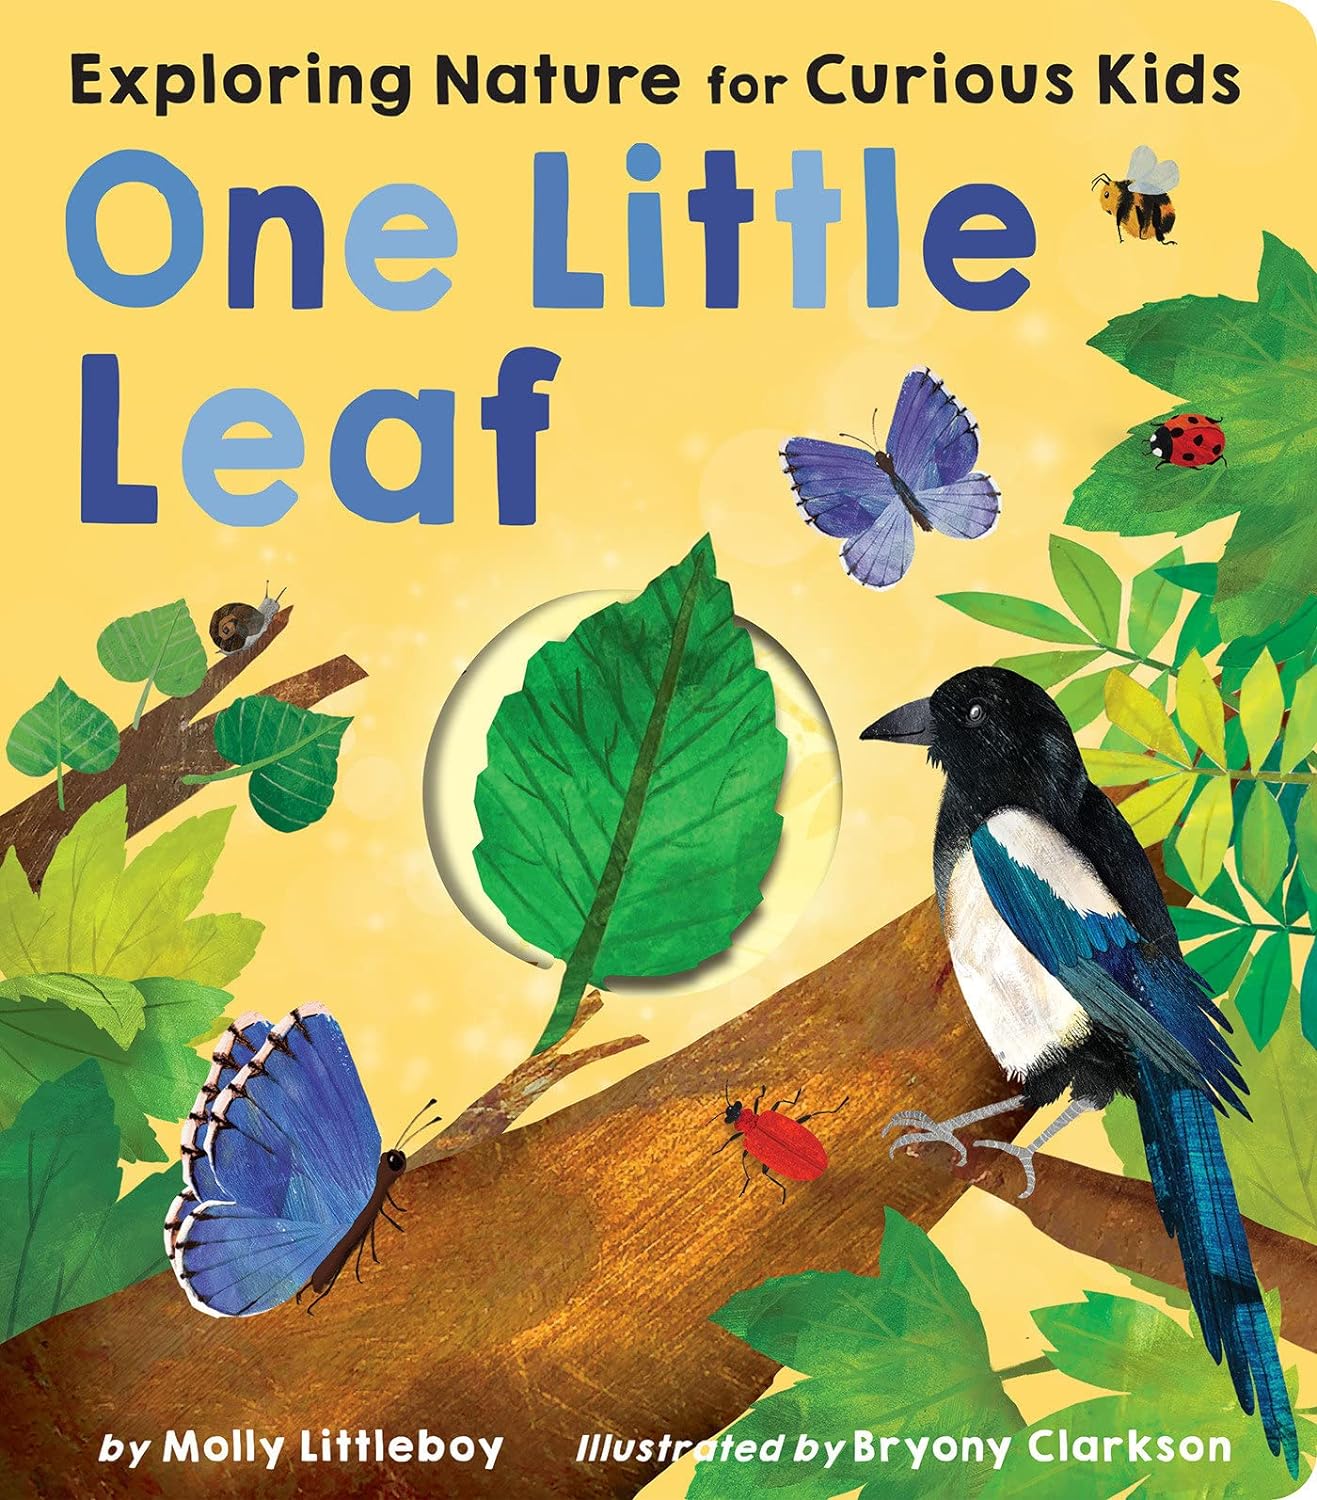 little tiger One Little Leaf: Exploring Nature for Curious Kids Board book – Lift the flap, by Molly Littleboy (Author), Bryony Clarkson (Illustrator) Hardcover